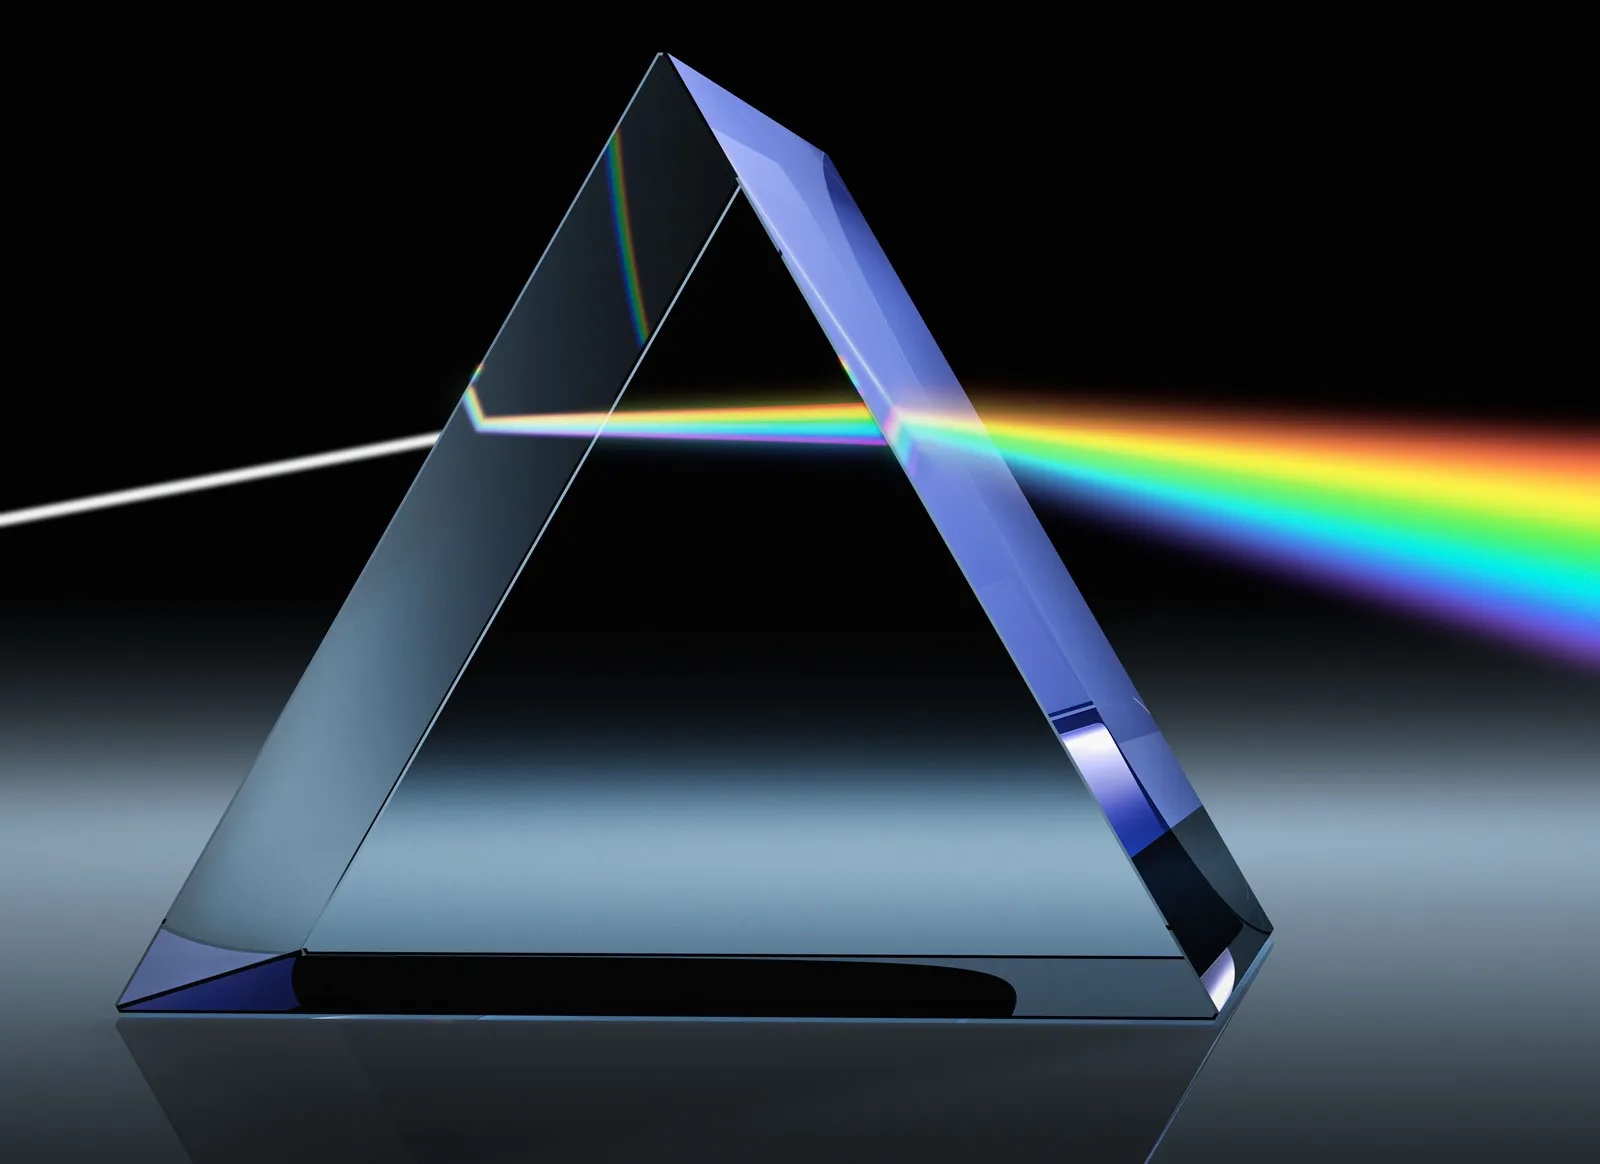 A prism bending white light into a rainbow.